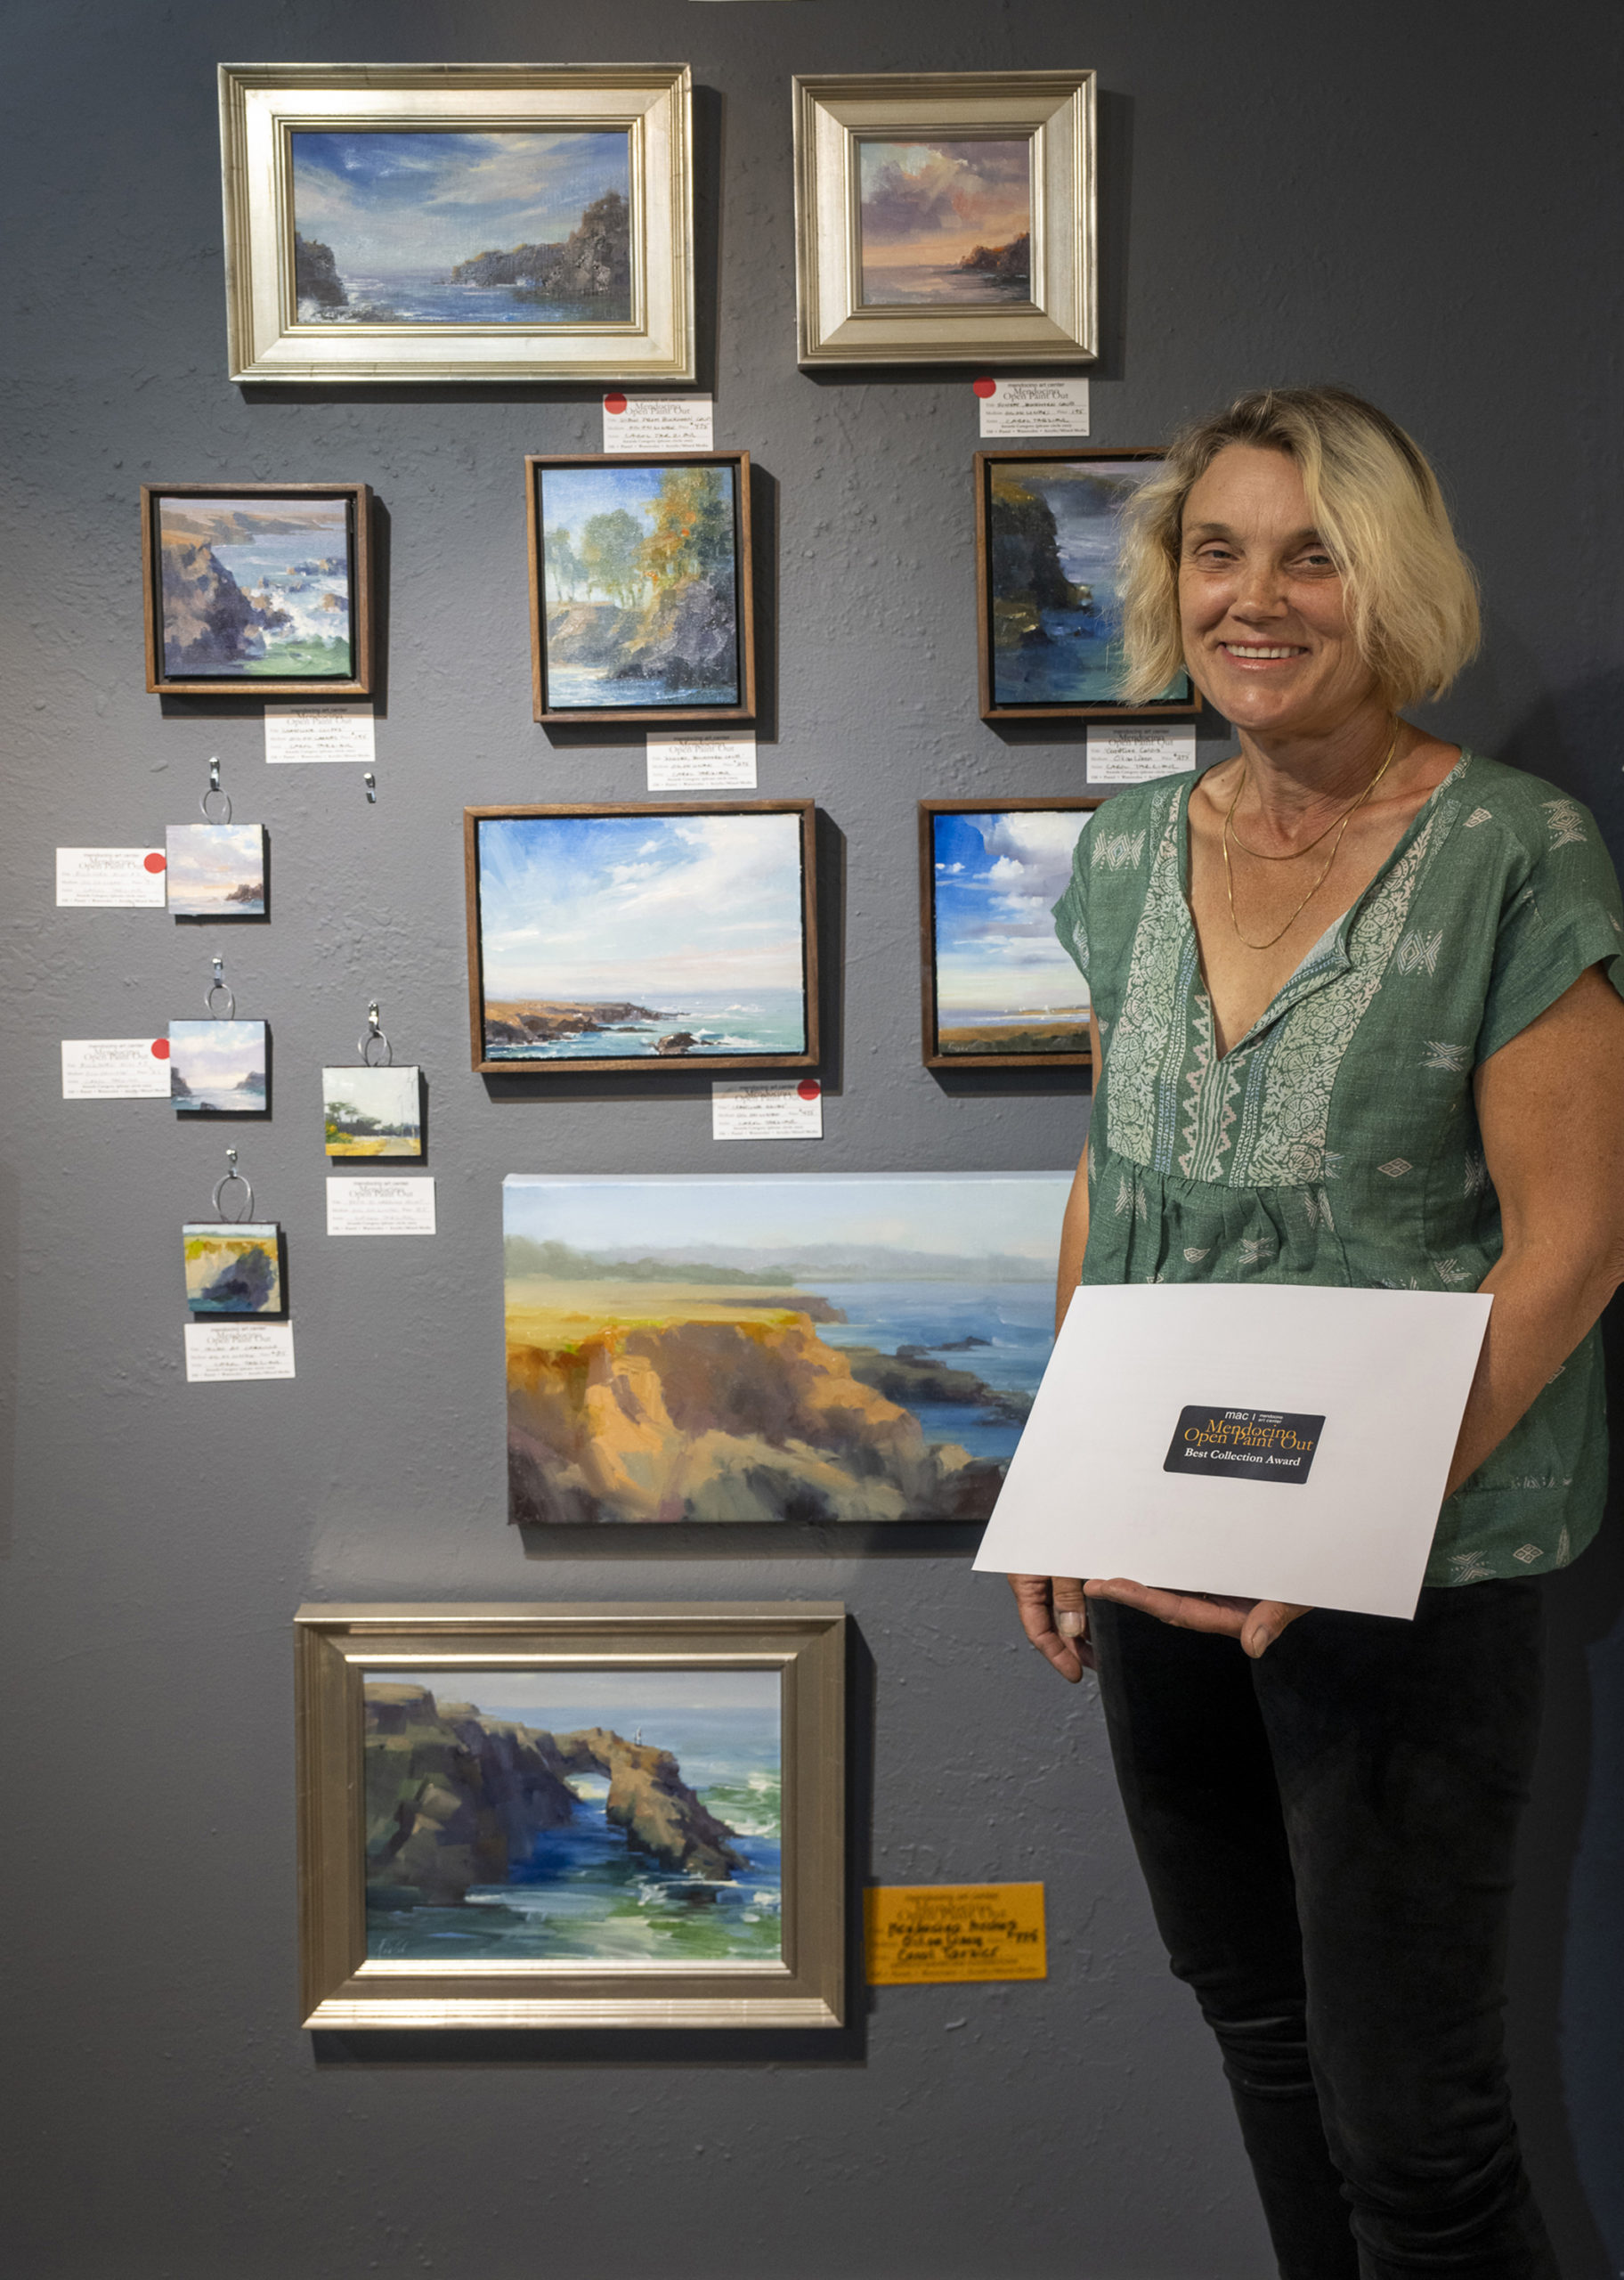 Carol Tarzier from Oakland, CA, was awarded the Plein Air Magazine Best Collection Award for her oil paintings.